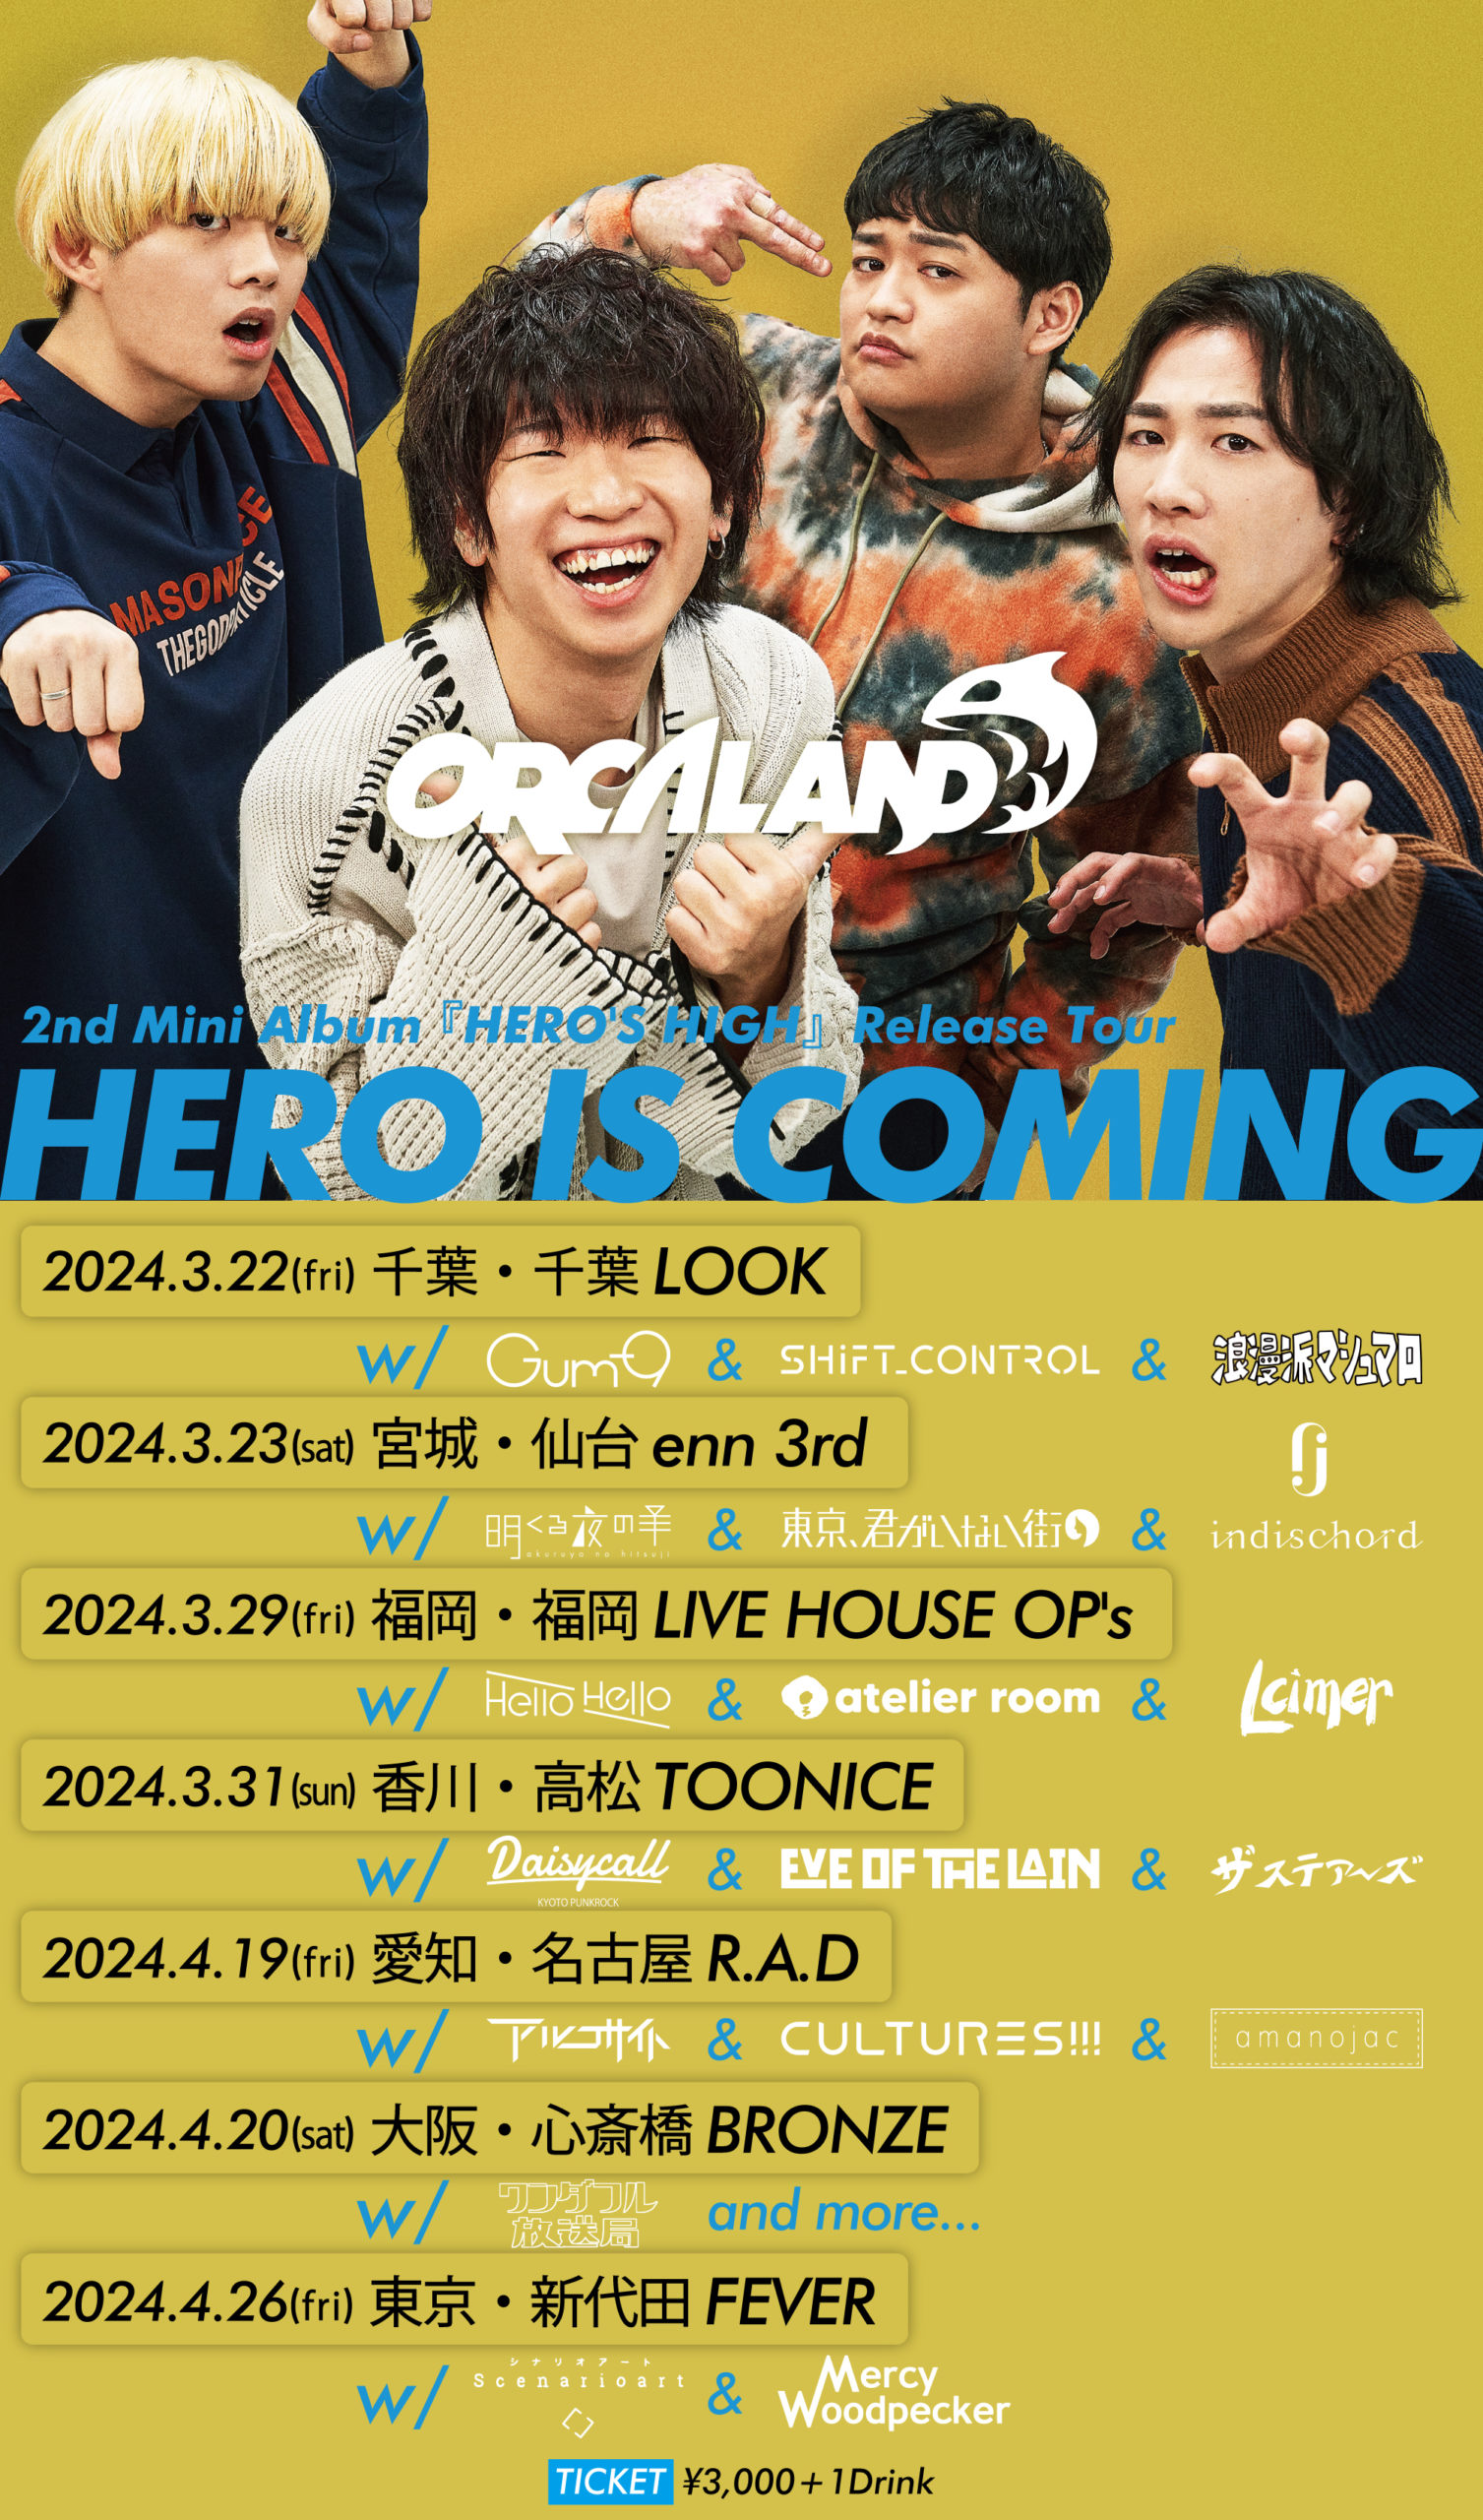 ORCALAND 2nd Mini Album Release Tour "HERO IS COMING"